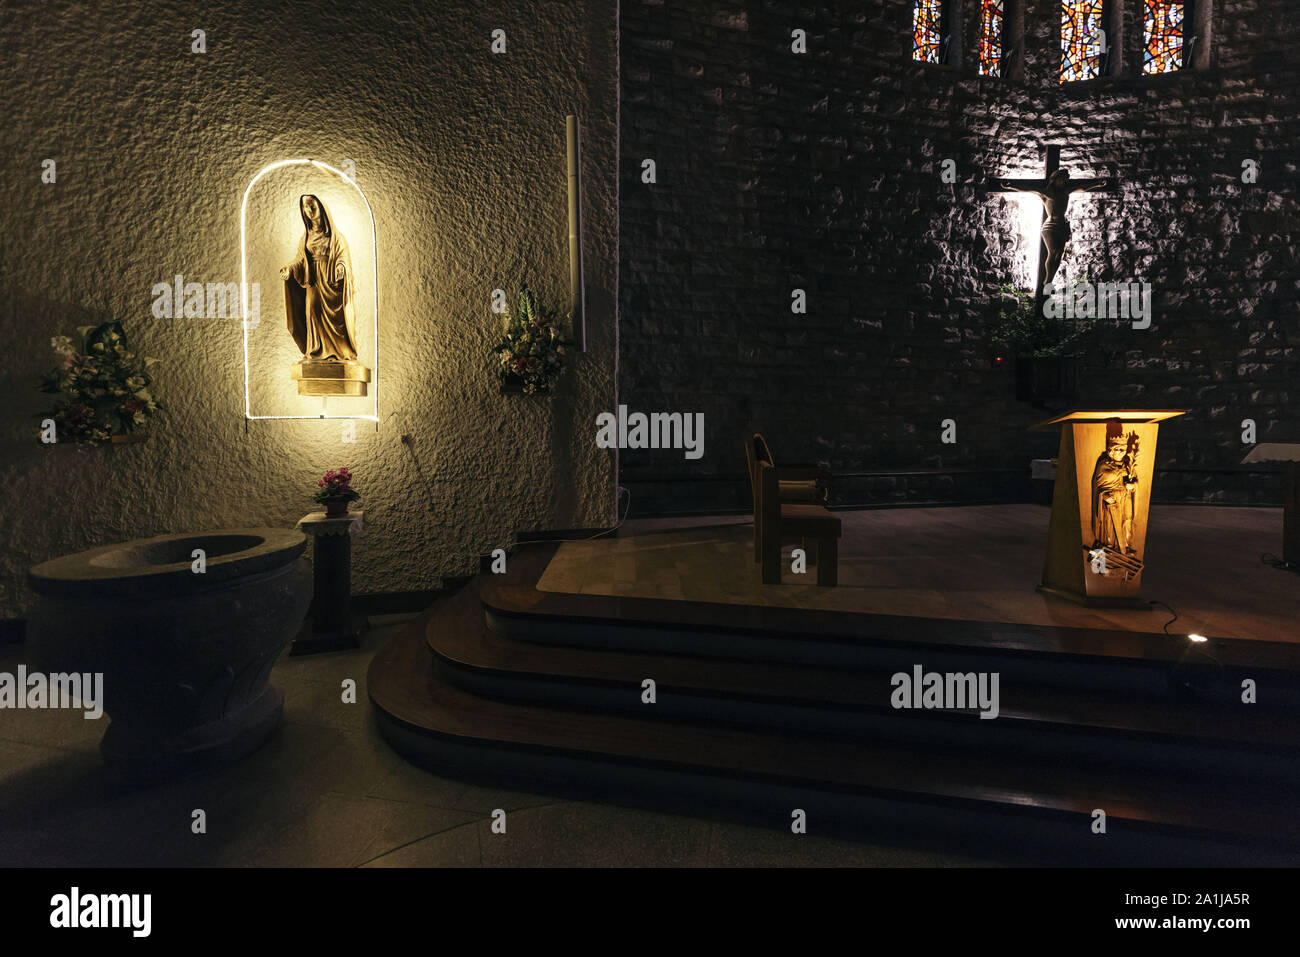 La Clusaz (eastern France). 2019/01/16: Statue of the Virgin illuminated in a niche, Christ on the Cross and altar in the church of the village Stock Photo